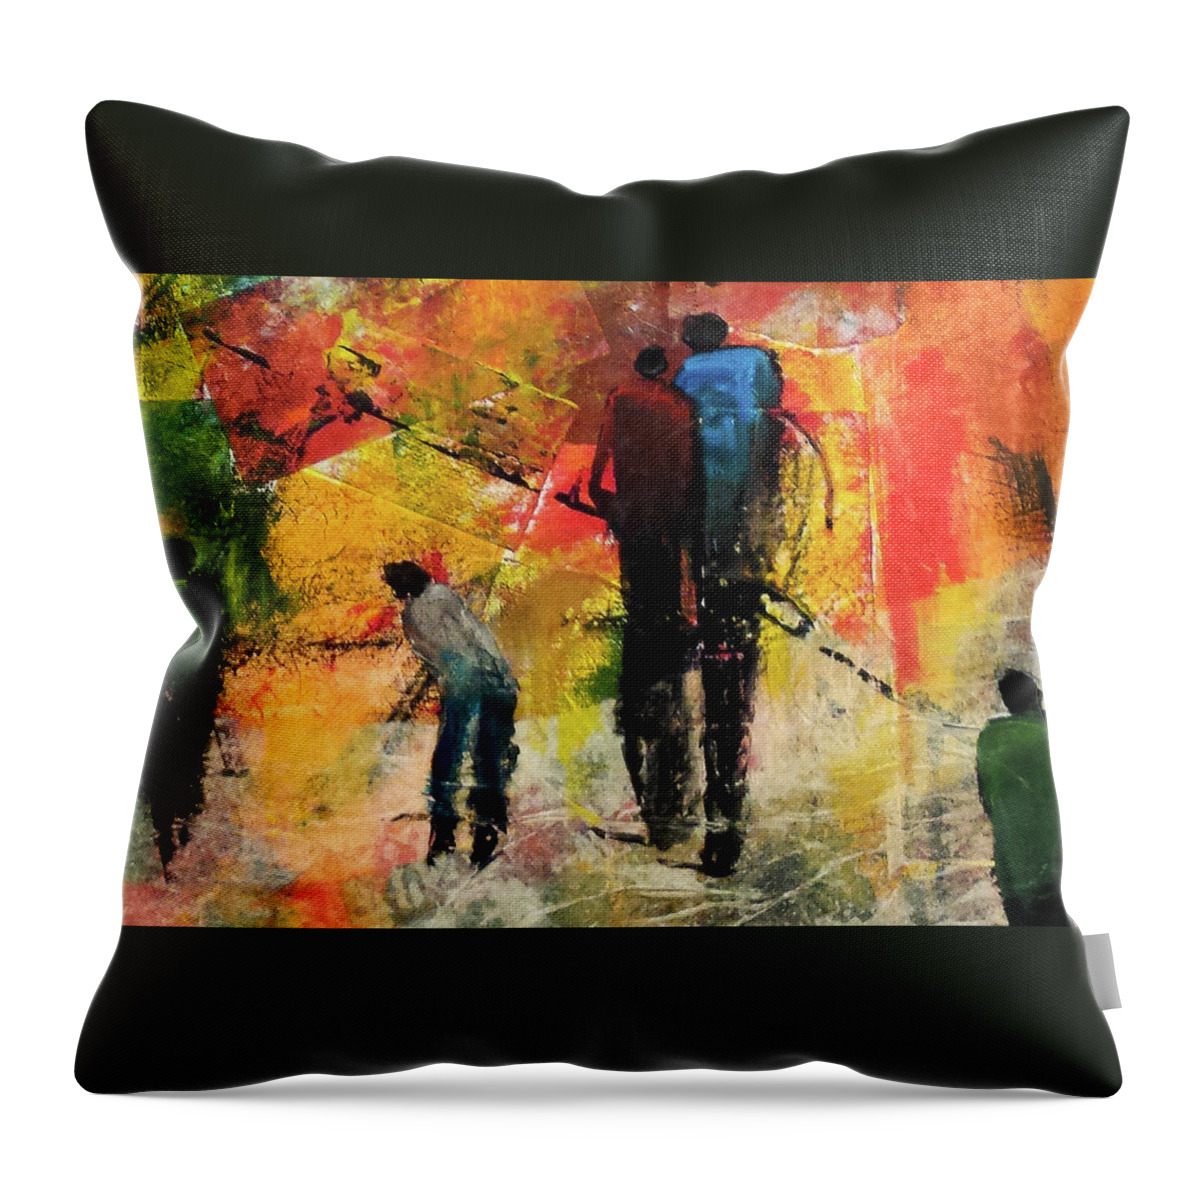 Acrylic Throw Pillow featuring the painting Heading Uptown by Lee Beuther